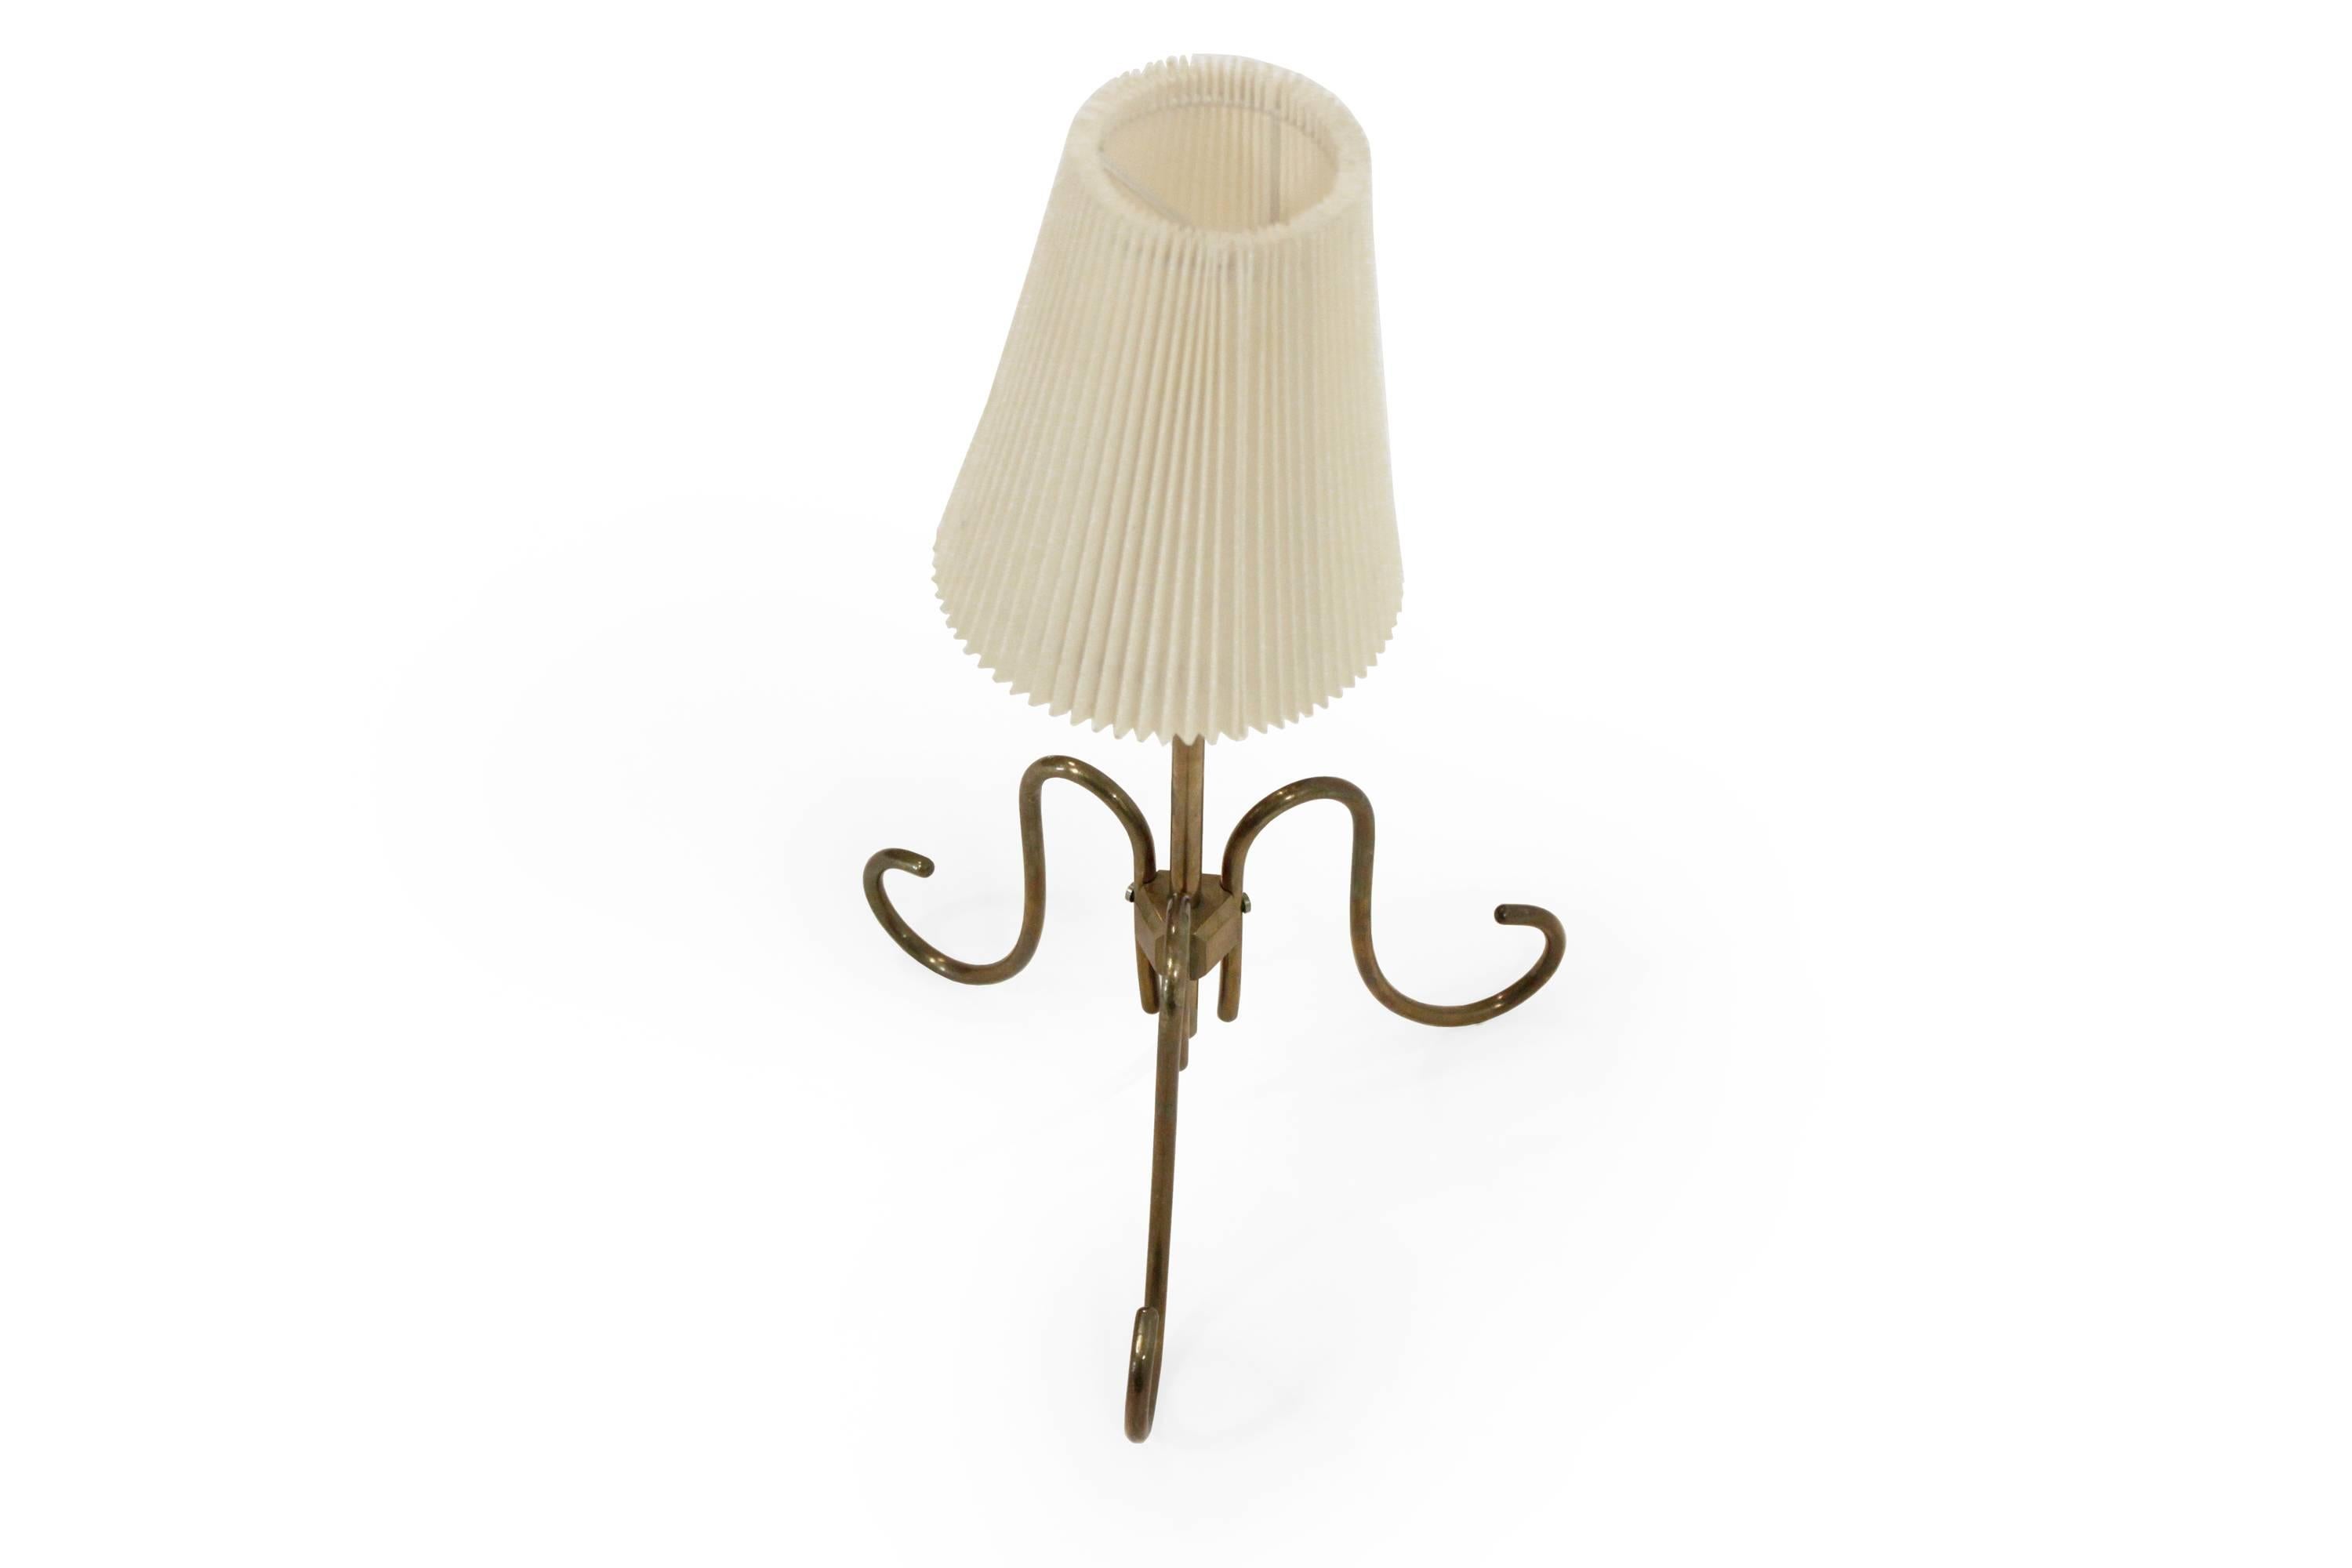 Decorative and graceful table lamp in brass.

Most likely designed and made in Sweden from circa 1960s second half.

The lamp is fully working and in good vintage condition.